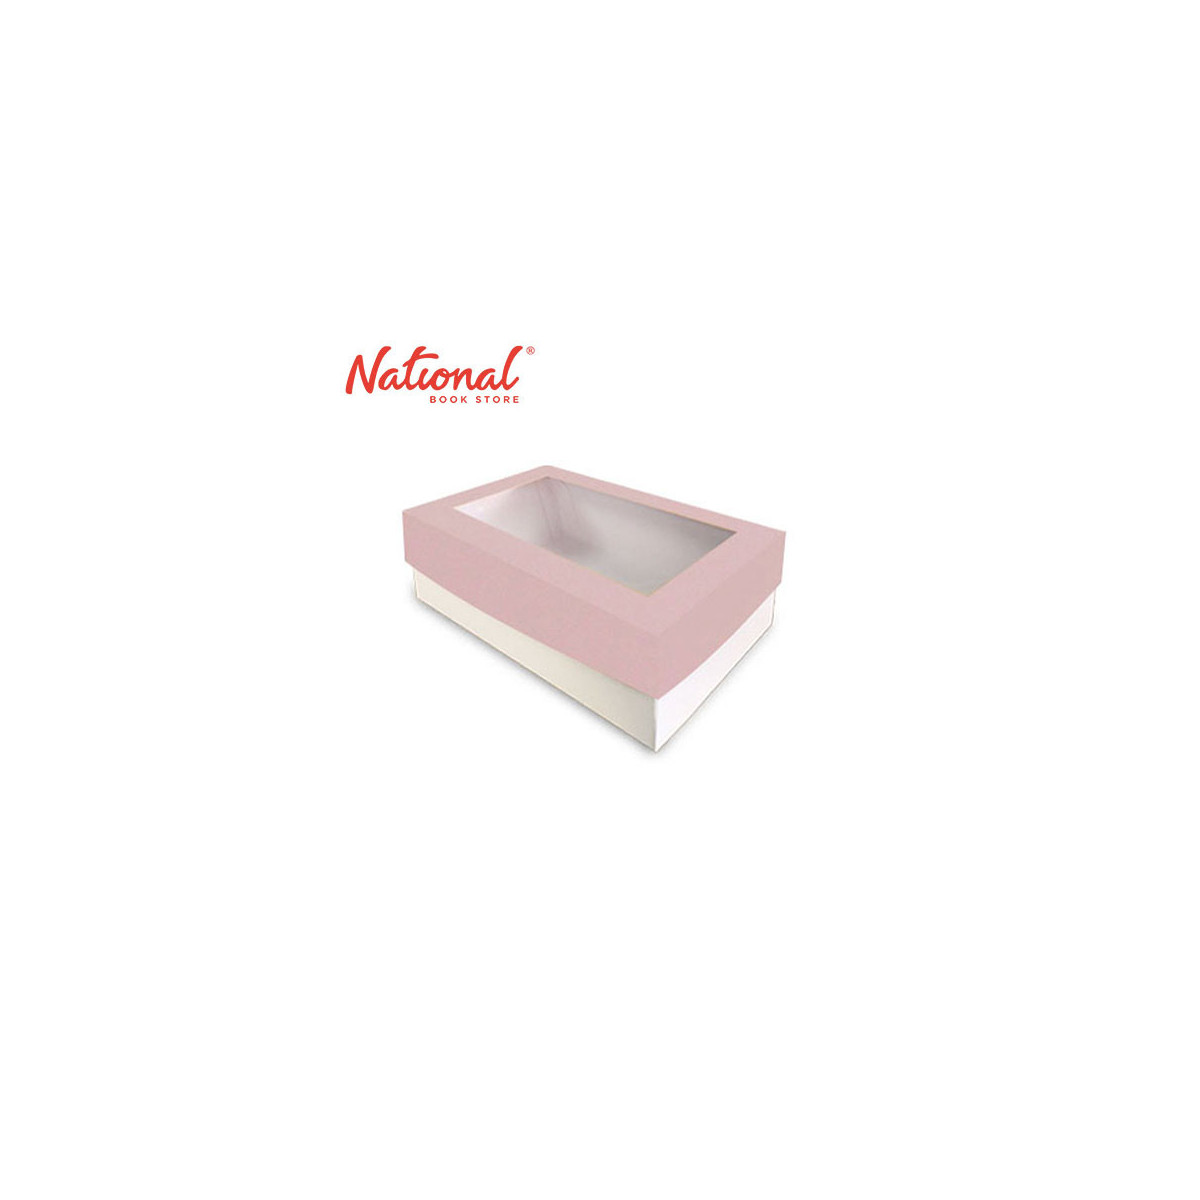 BossBox Plain Colored Gift Box 5S Rosequartz RW2 with window 6x9x3 inches 3028709 - Giftwrapping Supplies